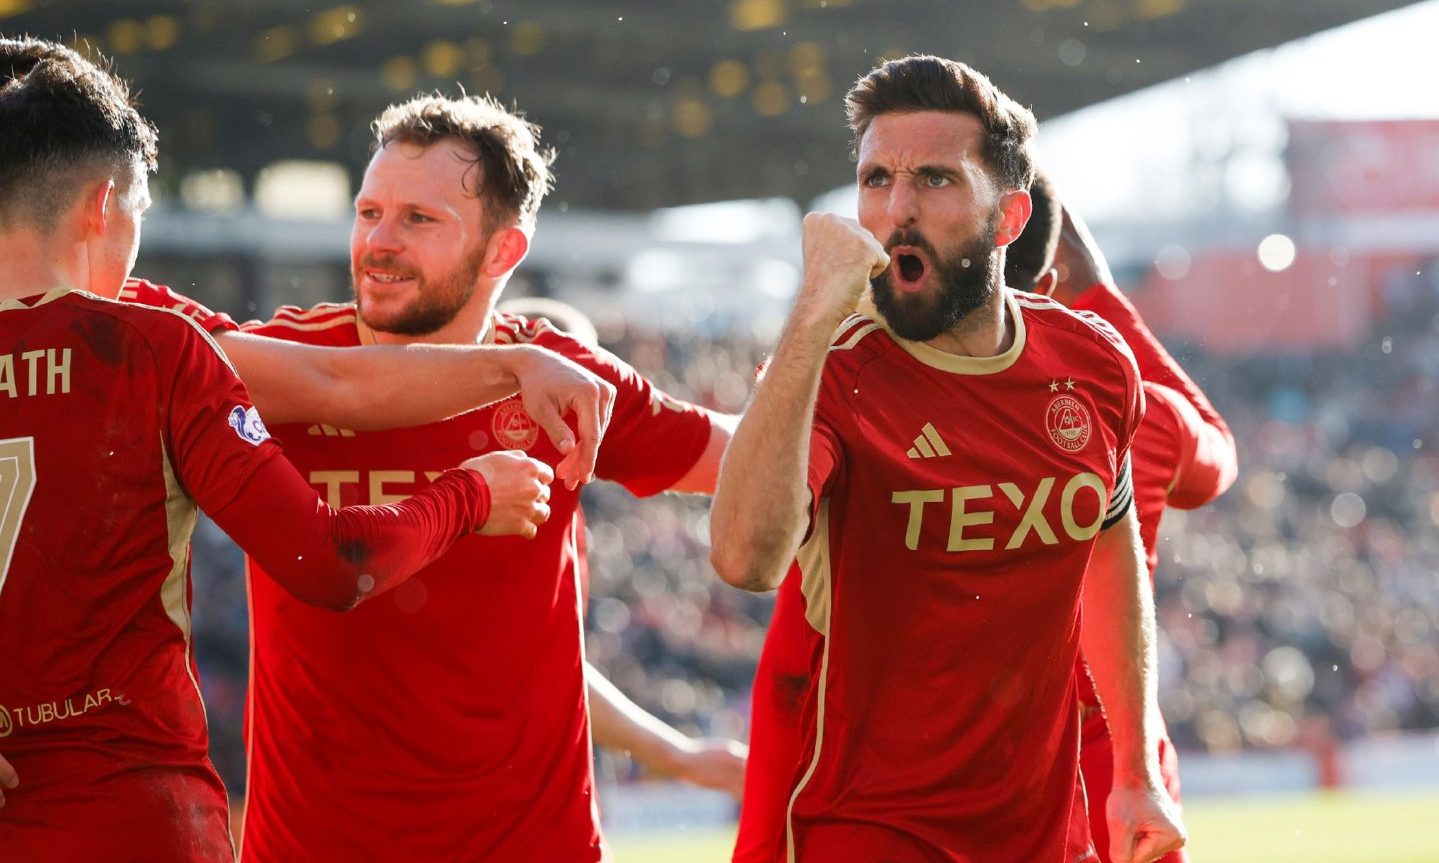 Aberdeen captain Greame Shinnie celebrates going 2-1 up against Ross County.